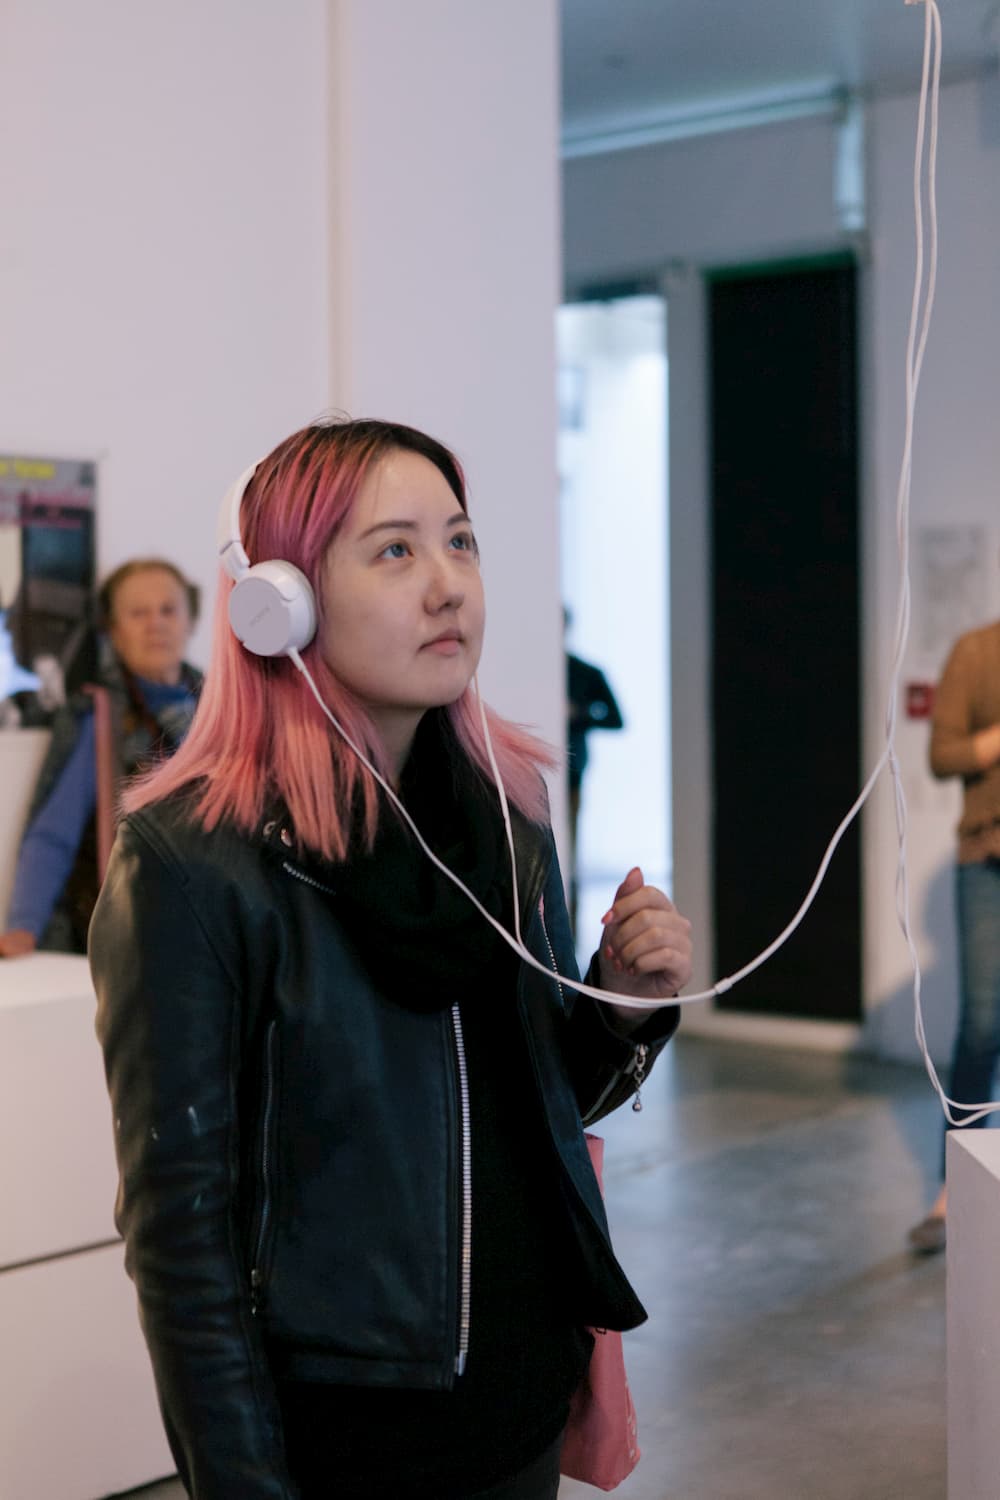 Person wearing headphones looking up at a monitor pictured out of frame.